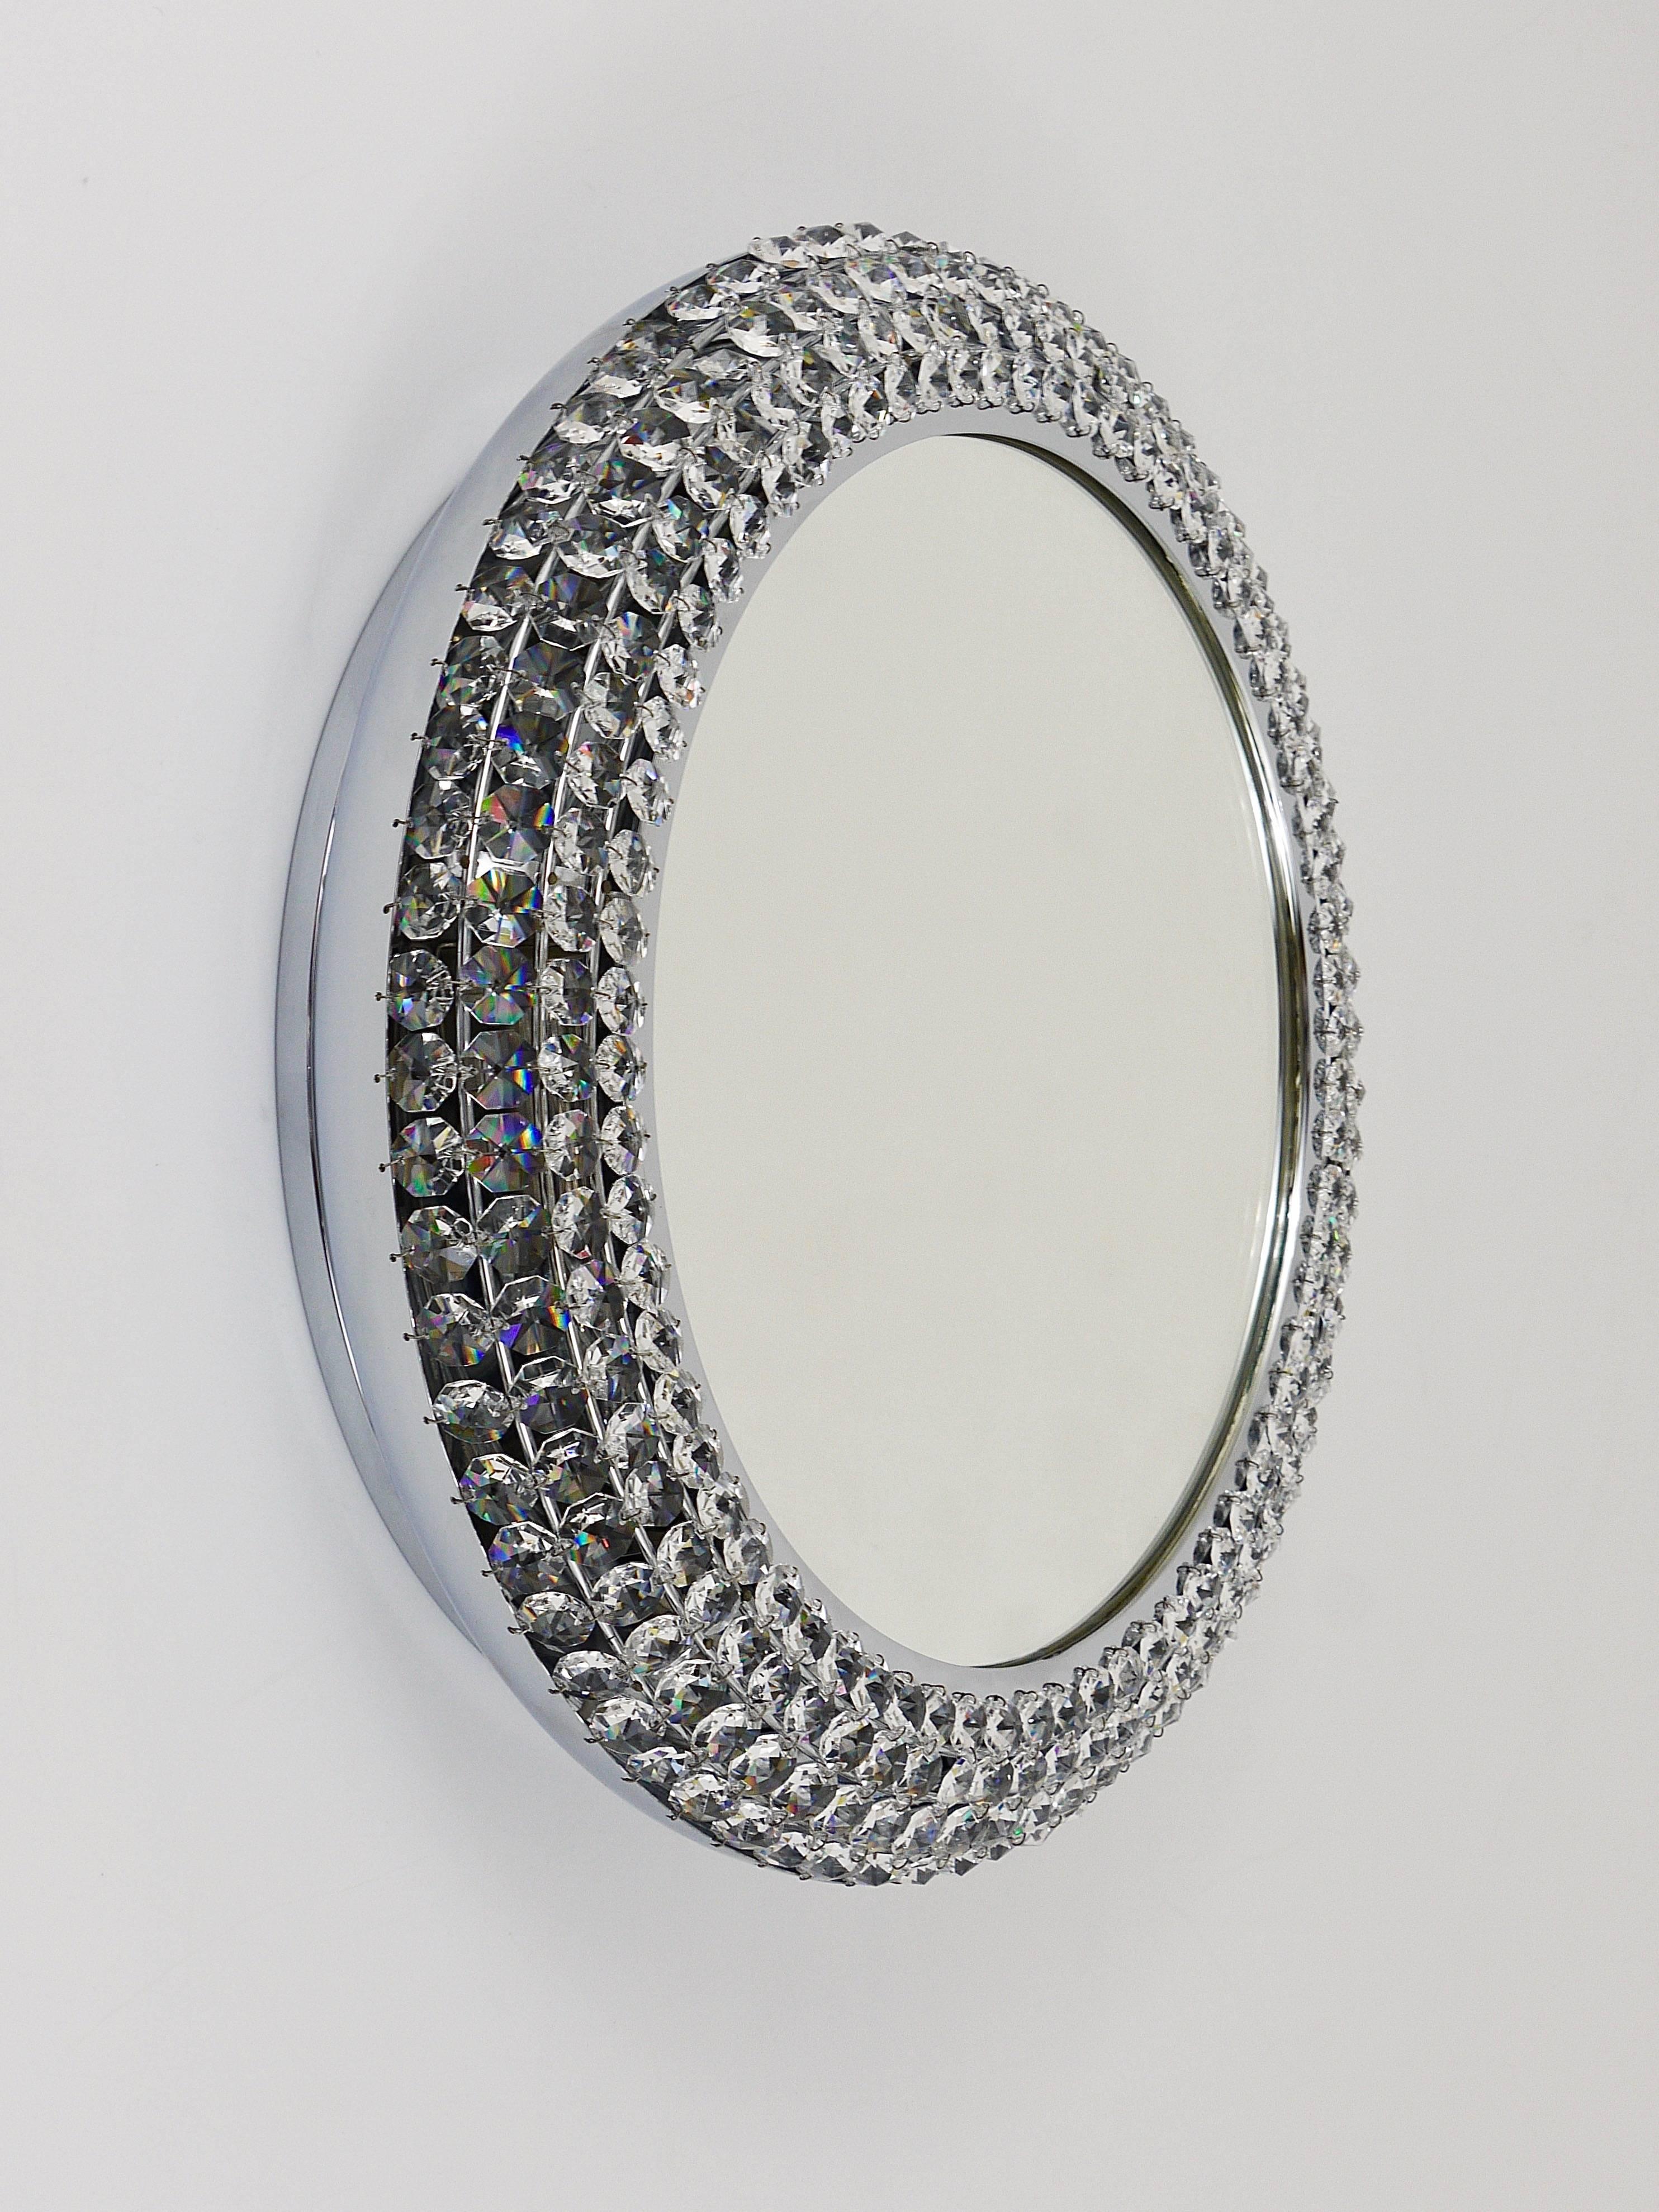 Metal Round Chromed Crystal Backlit Wall Mirror, Austria, 1960s For Sale